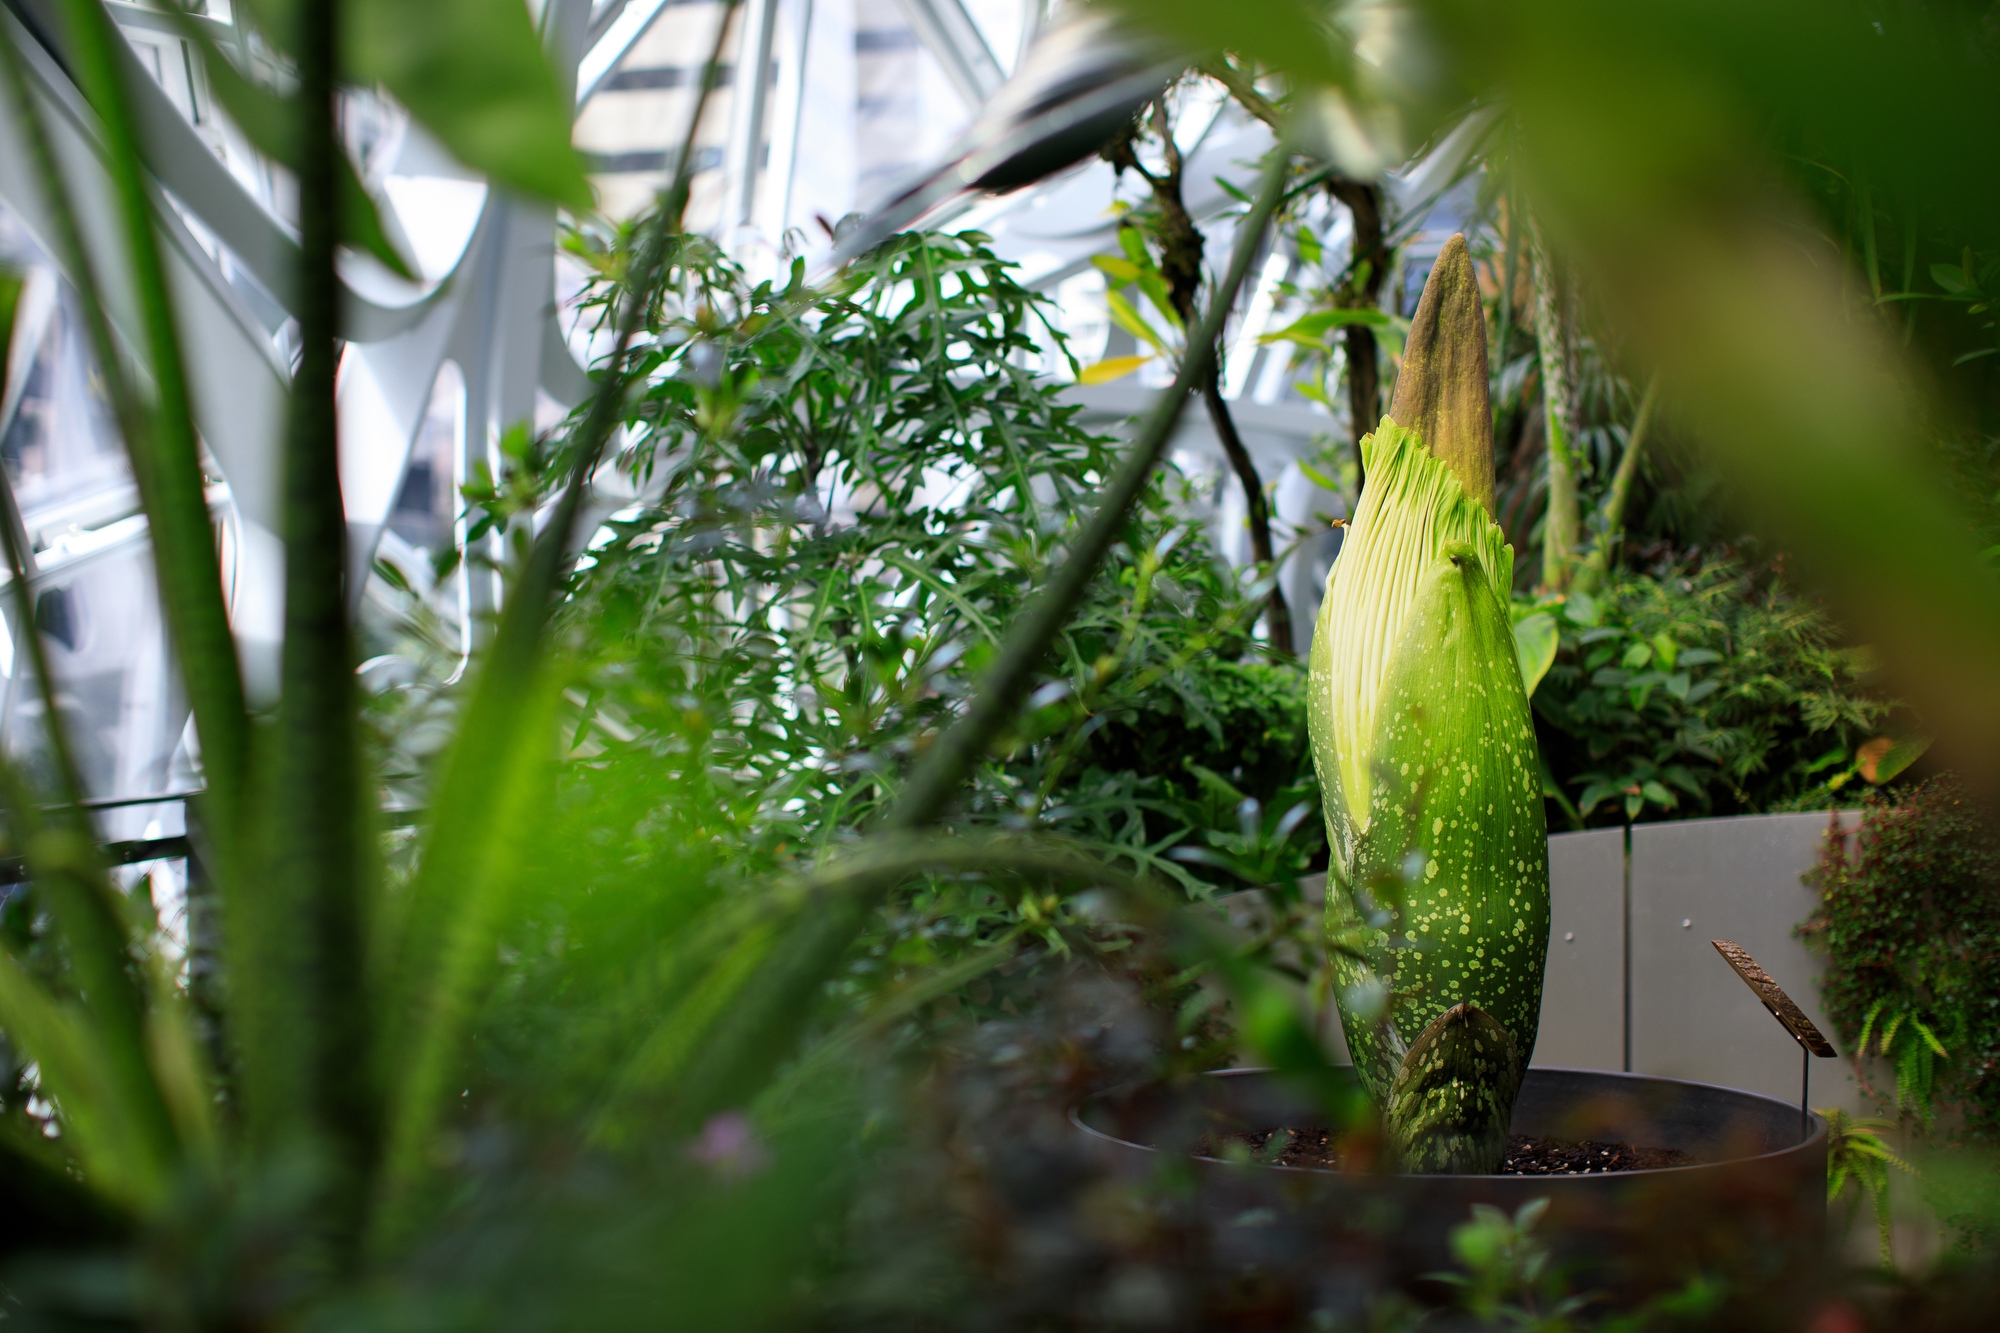 Corpse plant blooming in The Seattle Spheres. The plant is surrounded by other greenery, in the background the glass structure can be seen.